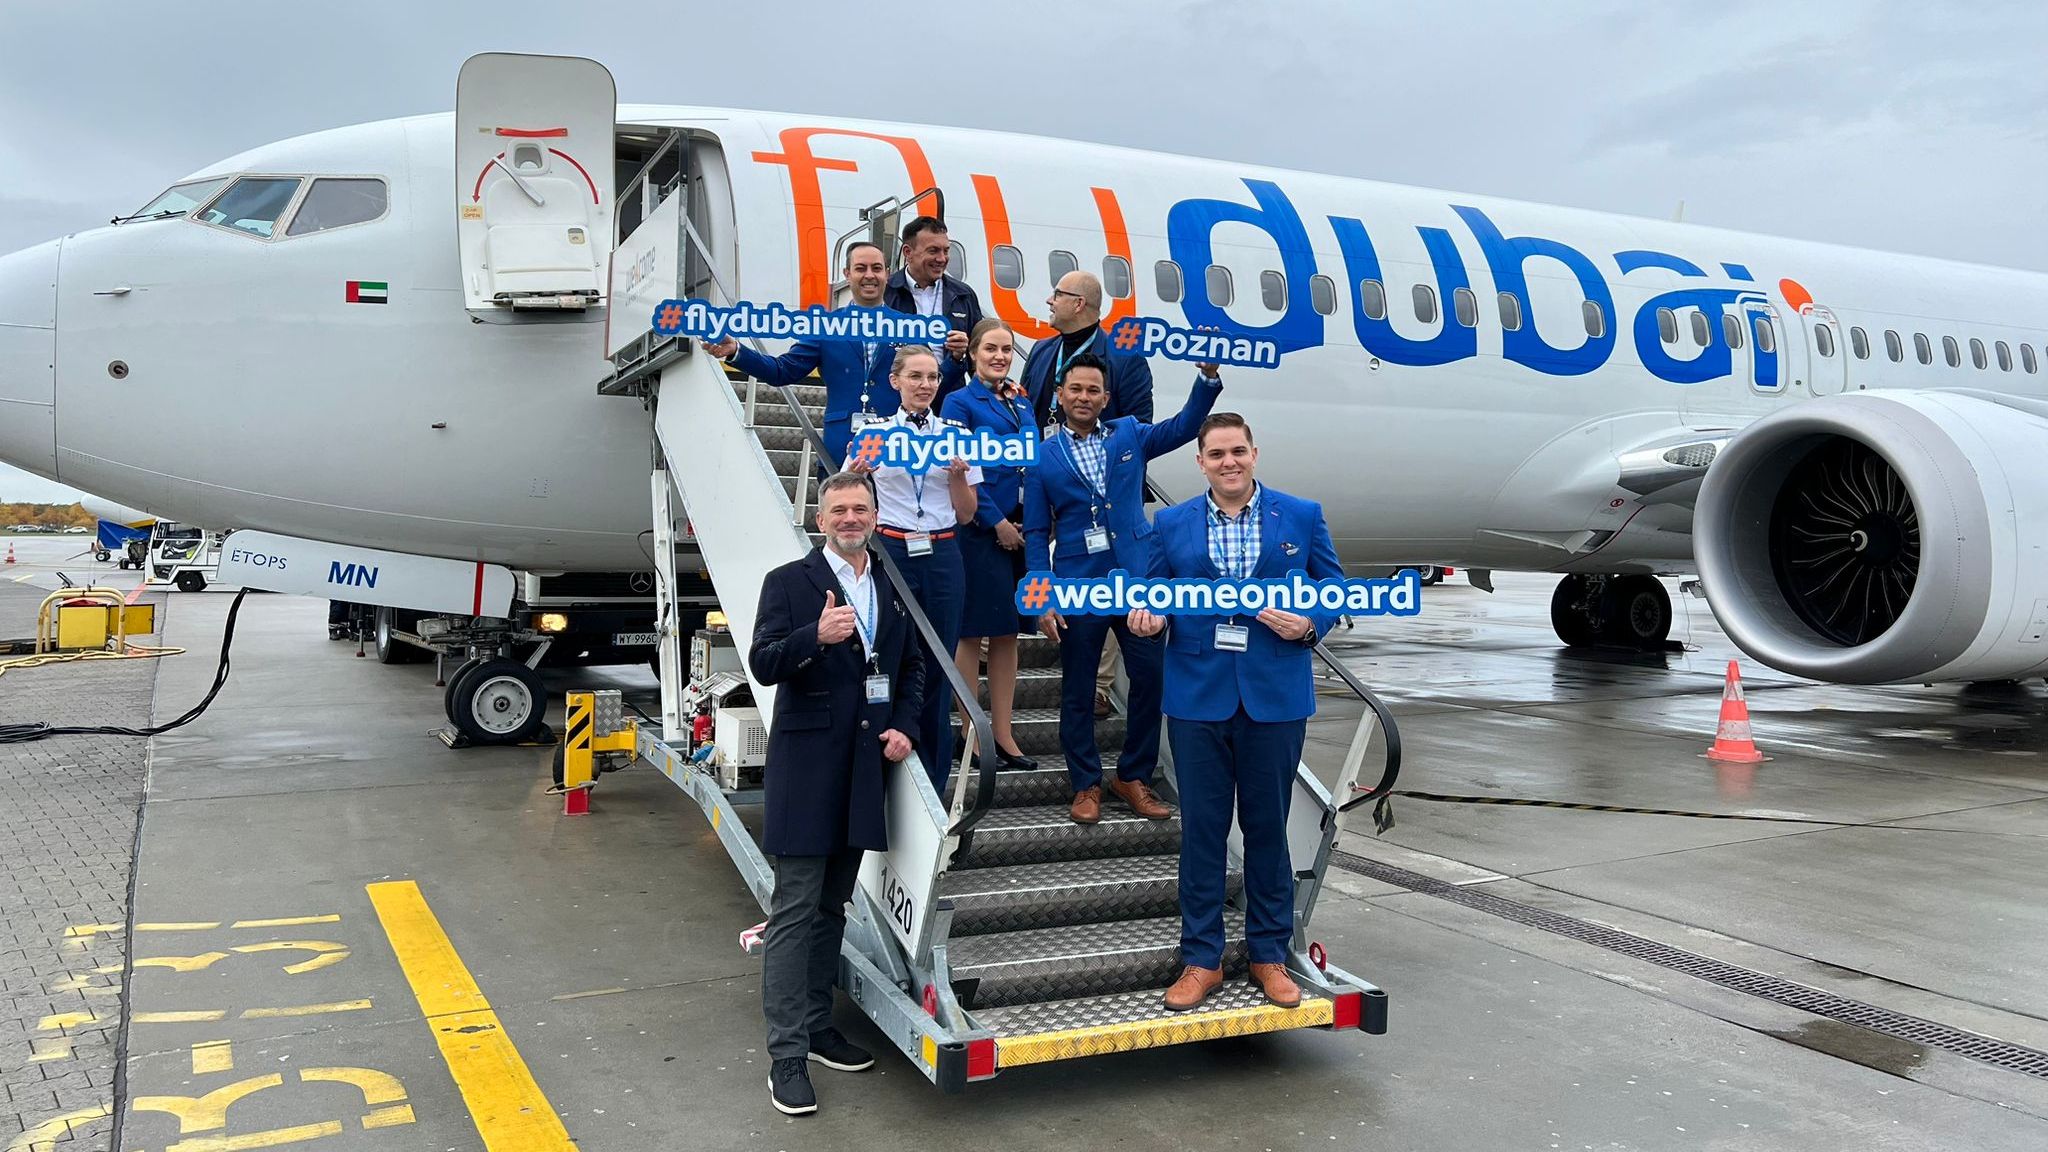 Several flydubai crew standing near an aircraft at Sphinx Airport in Cairo.